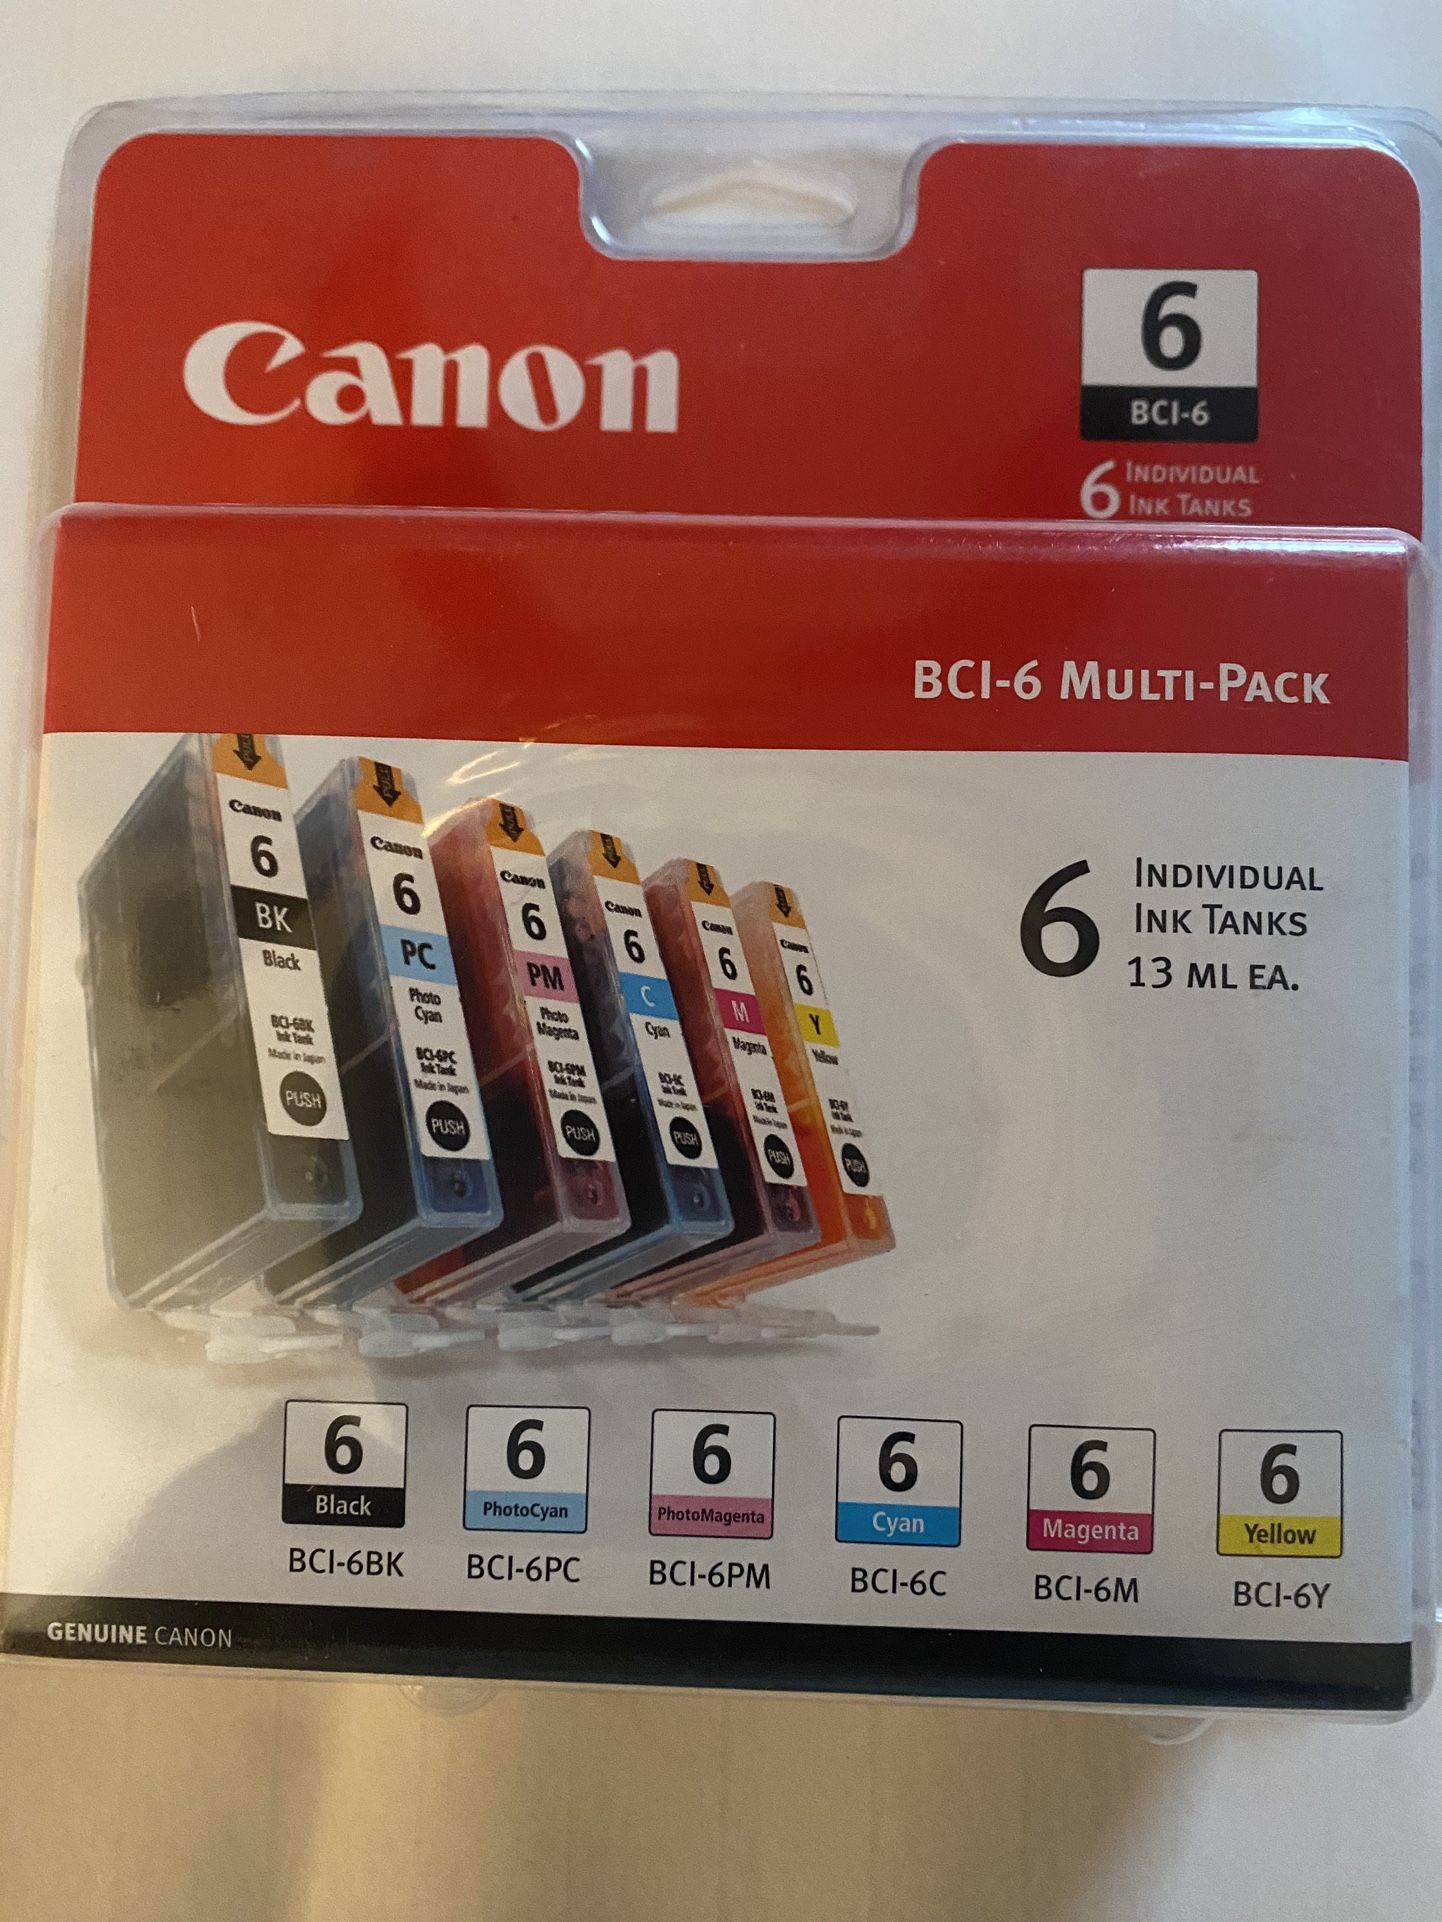 Canon BCI-6 Multipack Ink Tanks